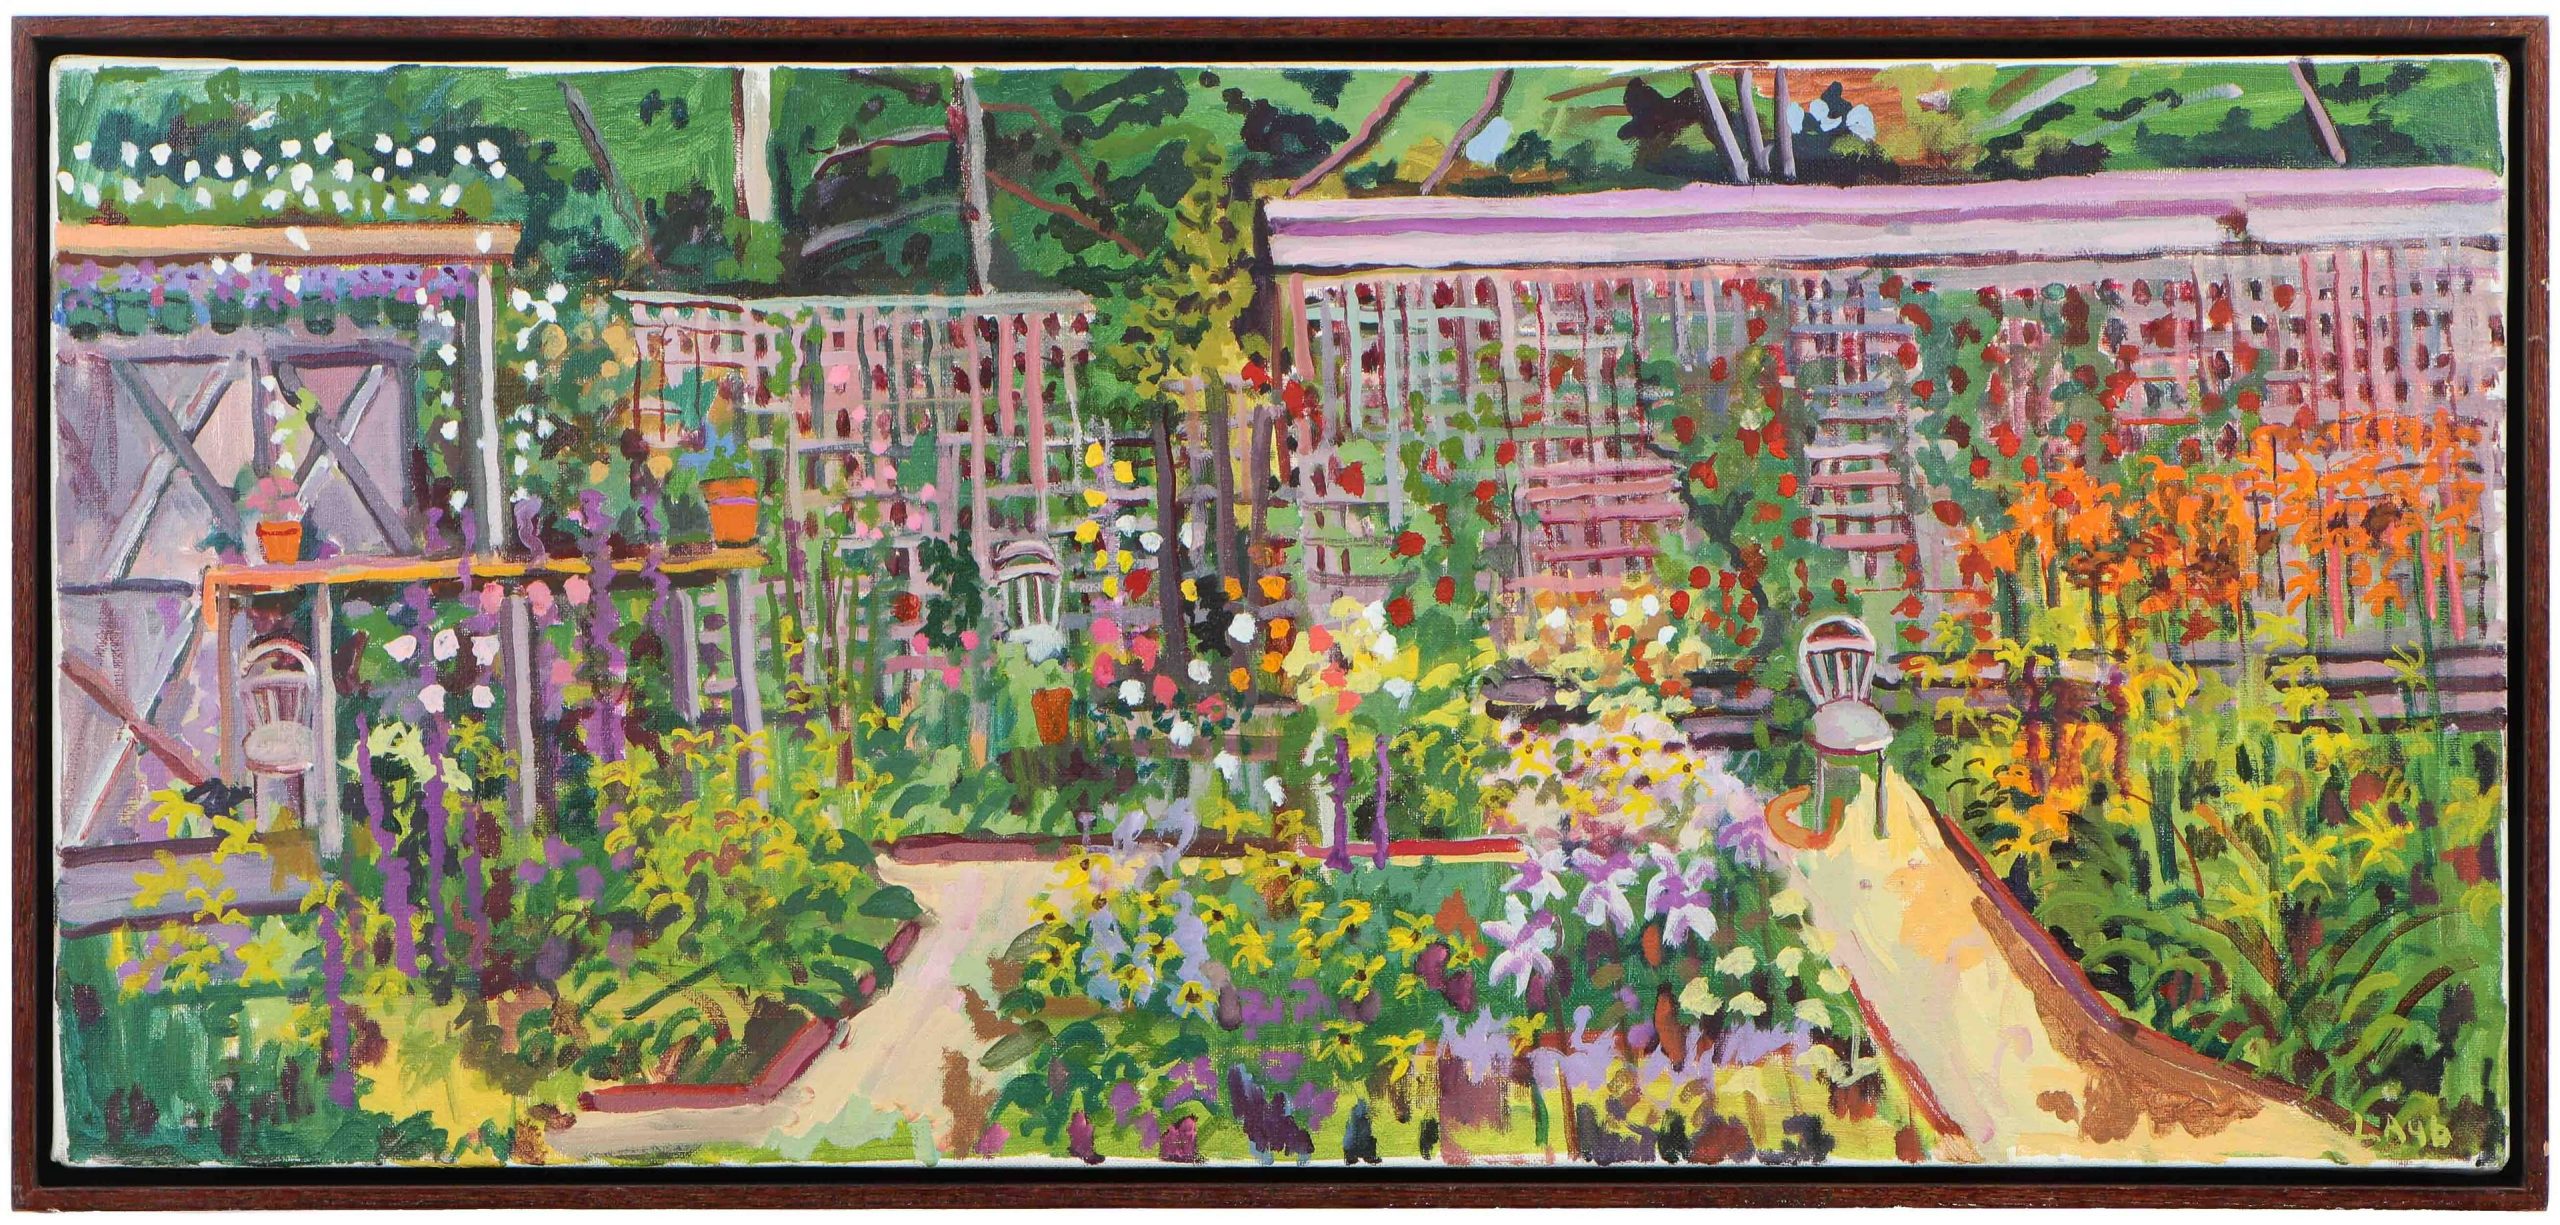 Lot 378. John Laub (American, 1947-2005) "Roy's Cutting Garden," 2005, oil on canvas, signed. Framed. Size: 18'' x 40'', 46 x 102 cm (stretcher); 20'' x 42'', 51 x 107 cm (frame). Trained in Philadelphia and New York, John Laub (1947–2005) is most known for his representational landscapes, which depict lush forests, vibrant gardens, winding pathways and sun-soaked beaches. With vivifying color and bold brushwork, his depictions of places like Fire Island, Coral Gables, and the Adirondacks celebrate the picturesque beauty of nature and reveal his joyous love of paint. Starting bid: $500